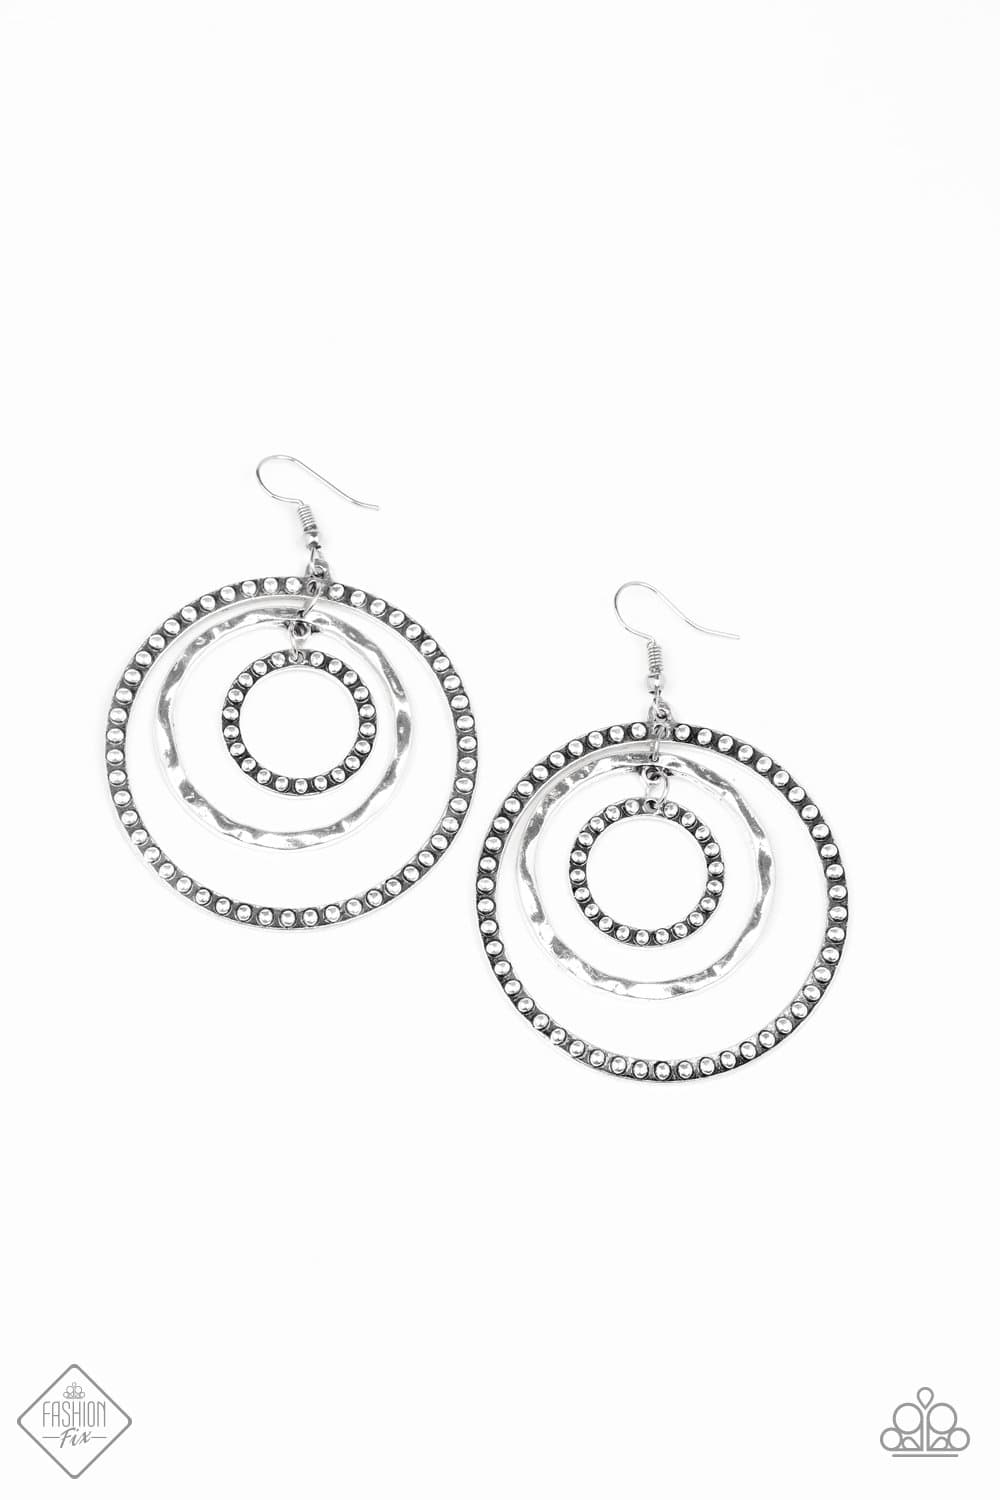 Paparazzi March 2020 Fashion Fix - Texture Takeover Silver Hoop Earrin –  GlaMarous Titi Jewels